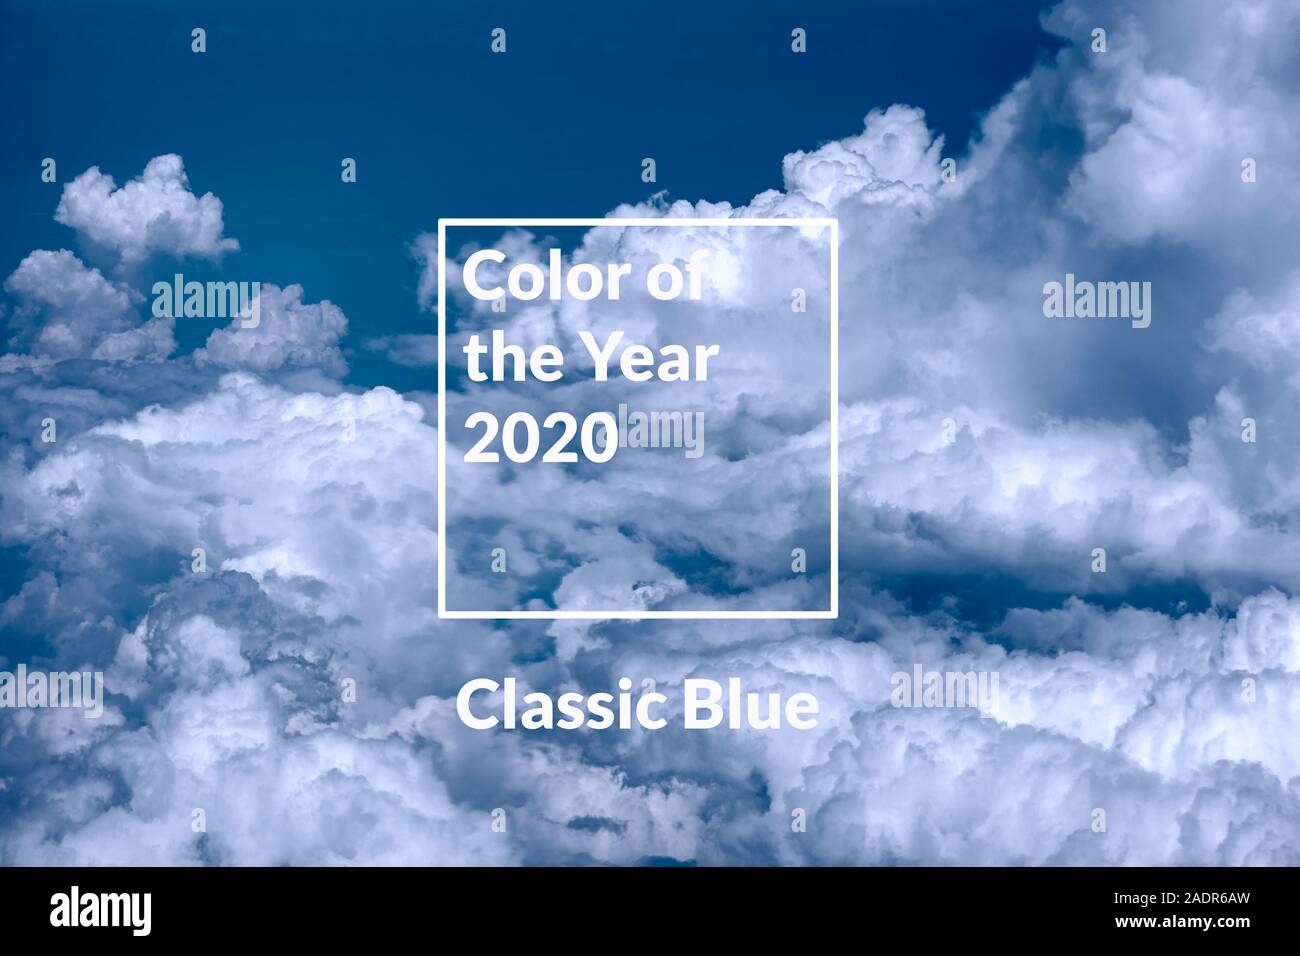 Blue sky background with white clouds toned in color of the year 2020 classic blue. Stock Photo